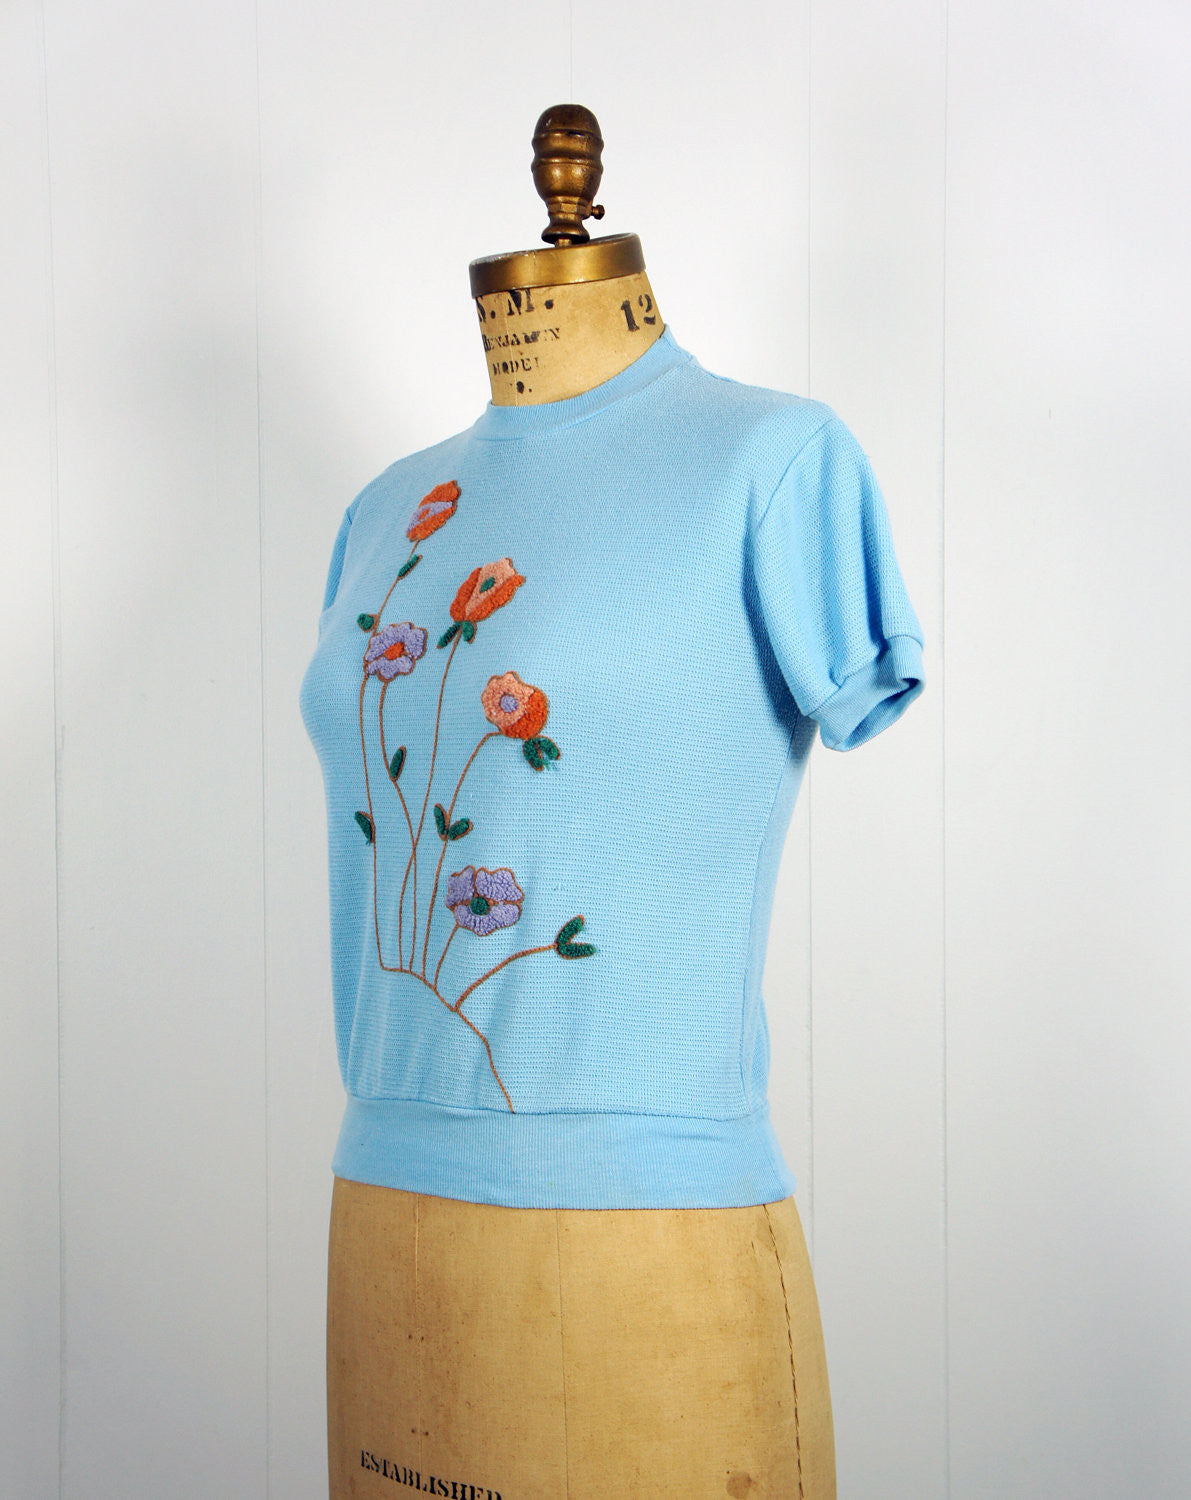 1970's Light Blue Thermal Top w/ Floral Embellishments - Size S